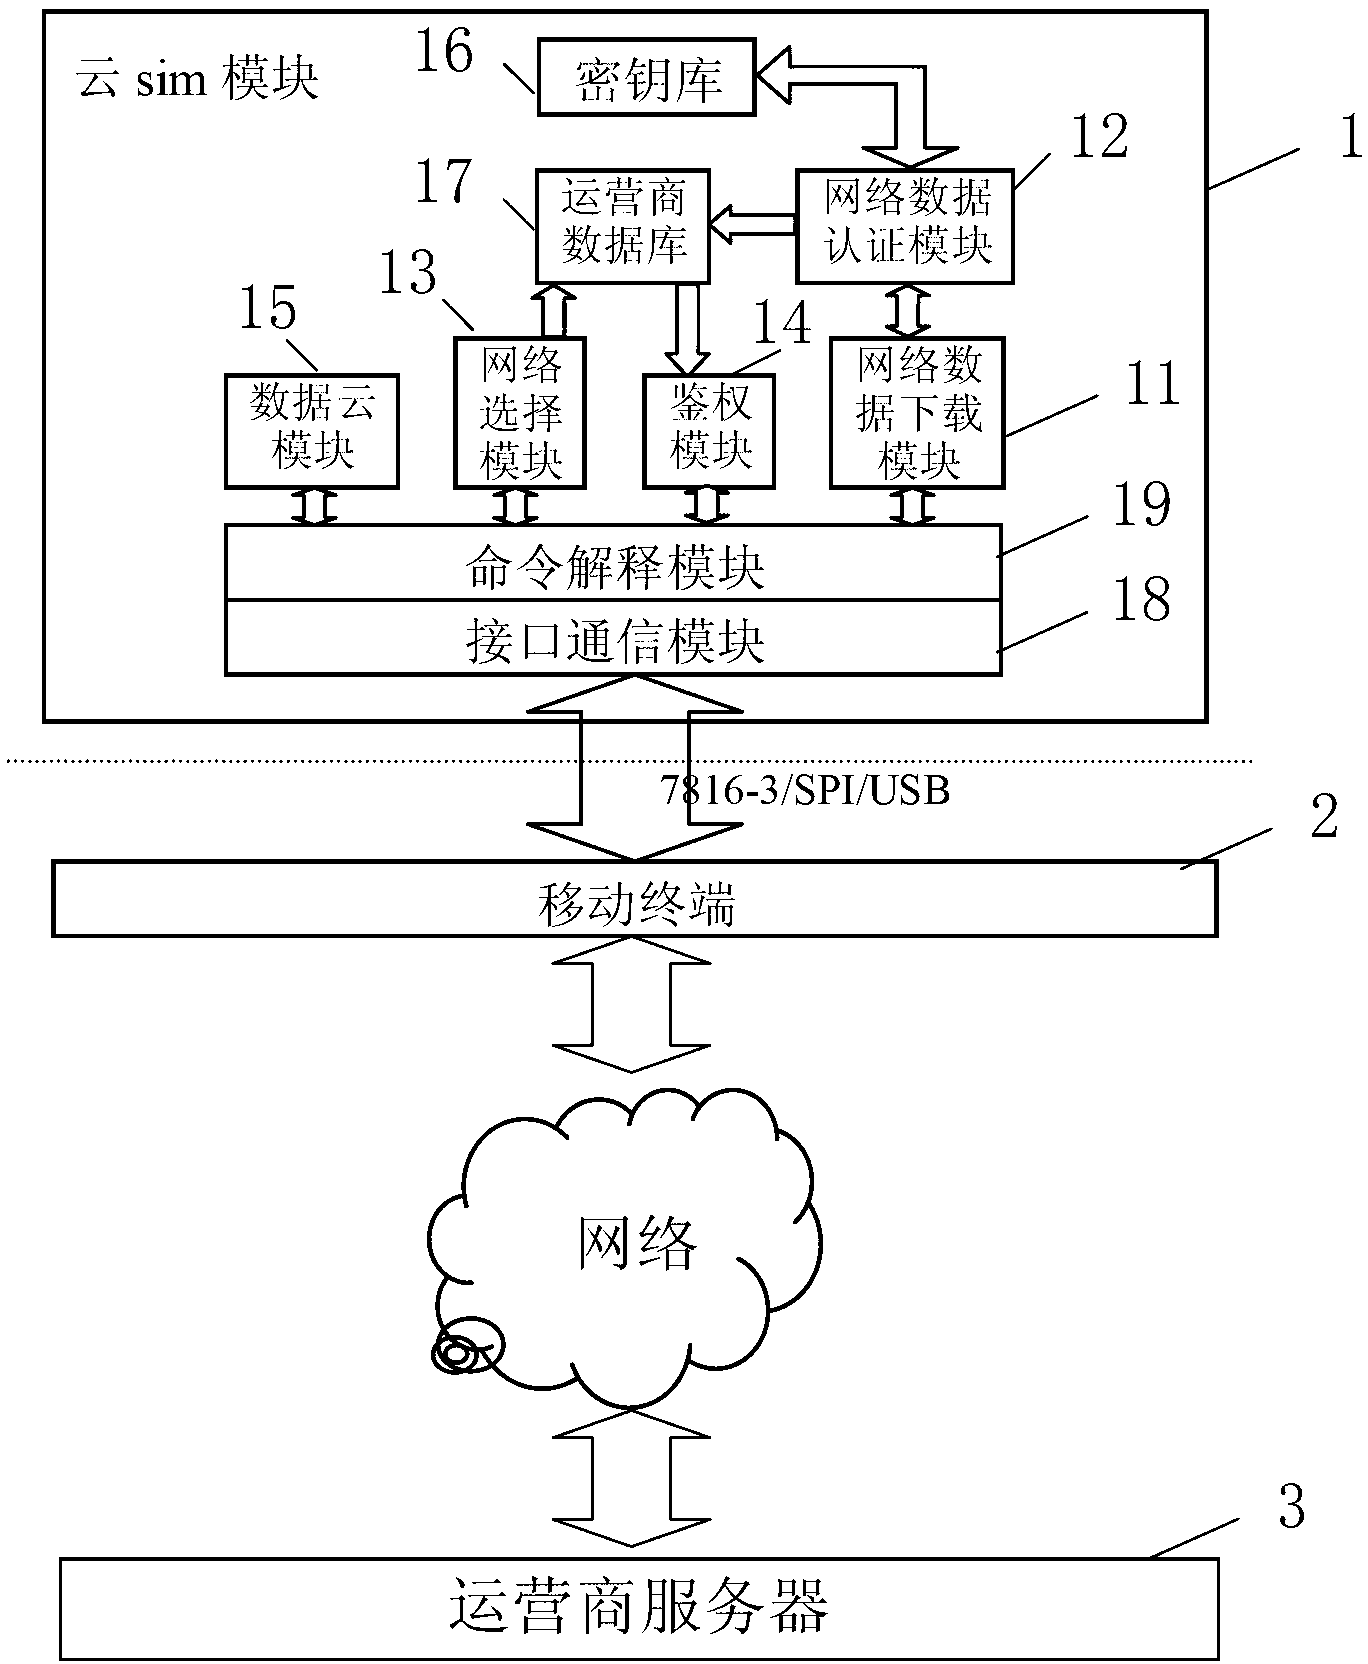 Cloud SIM (subscriber identity module) capable of freely downloading network data